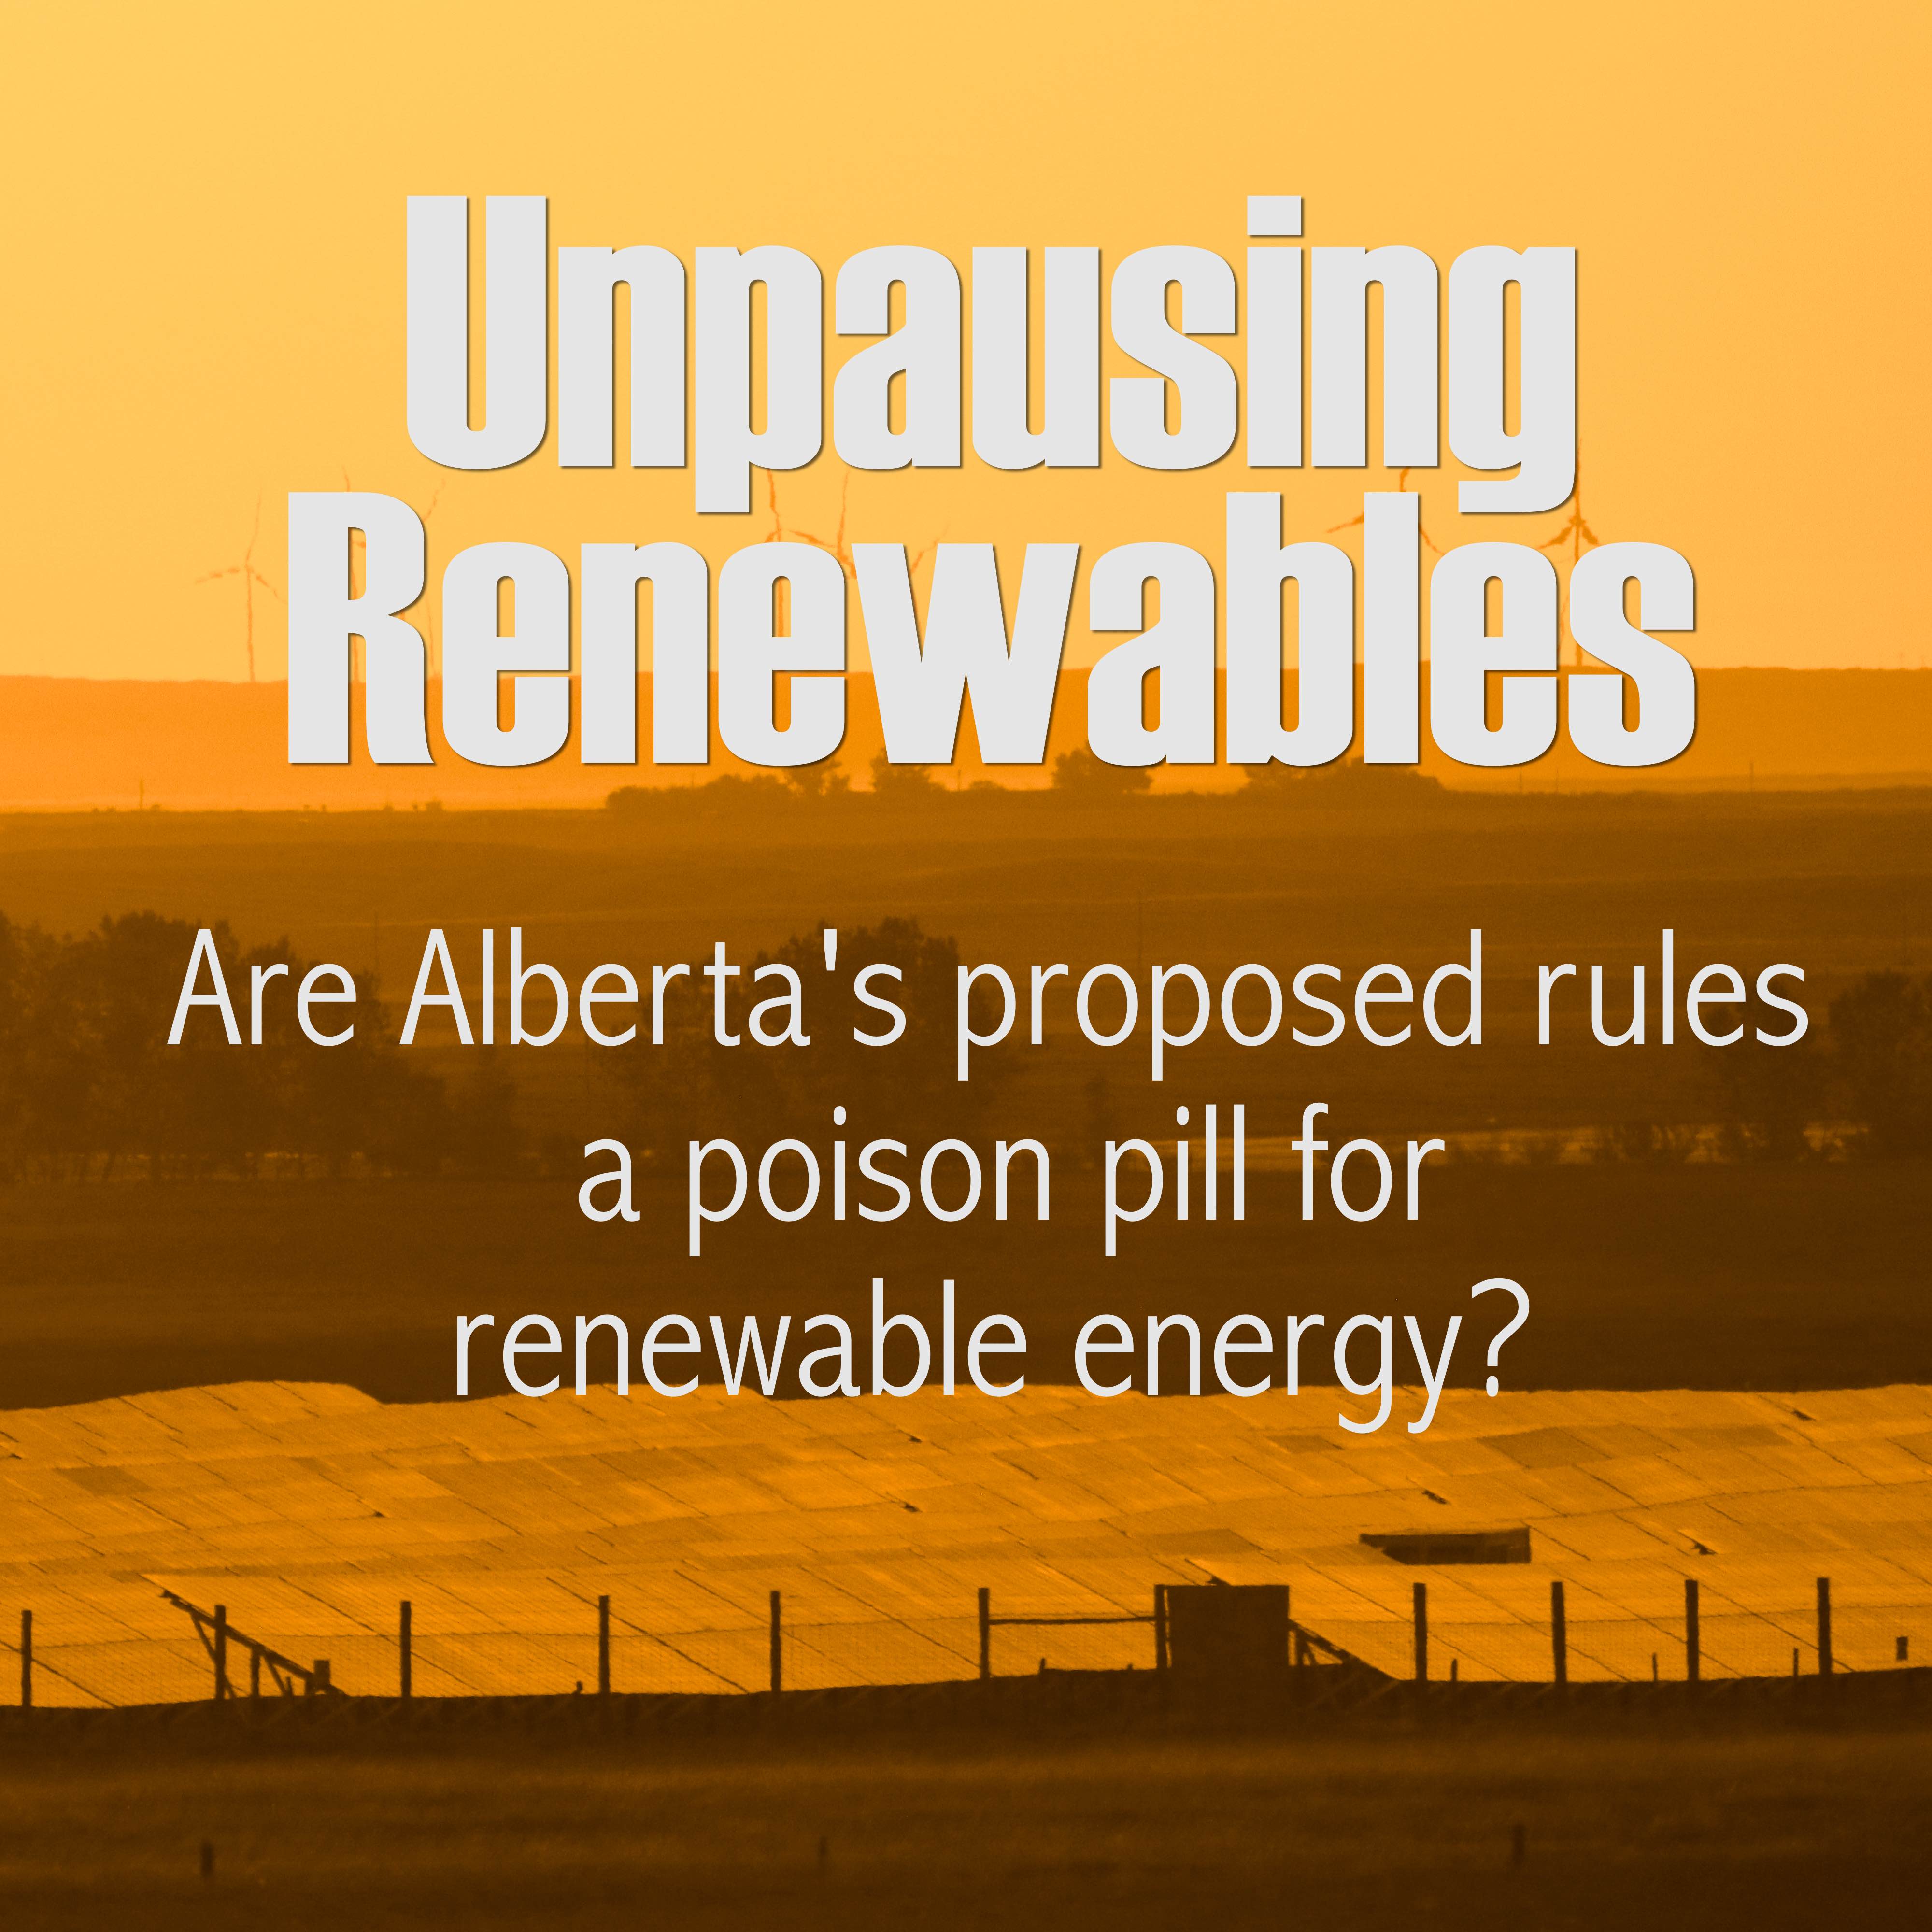 Alberta ends its moratorium on renewable energy, are new rules a poison pill?